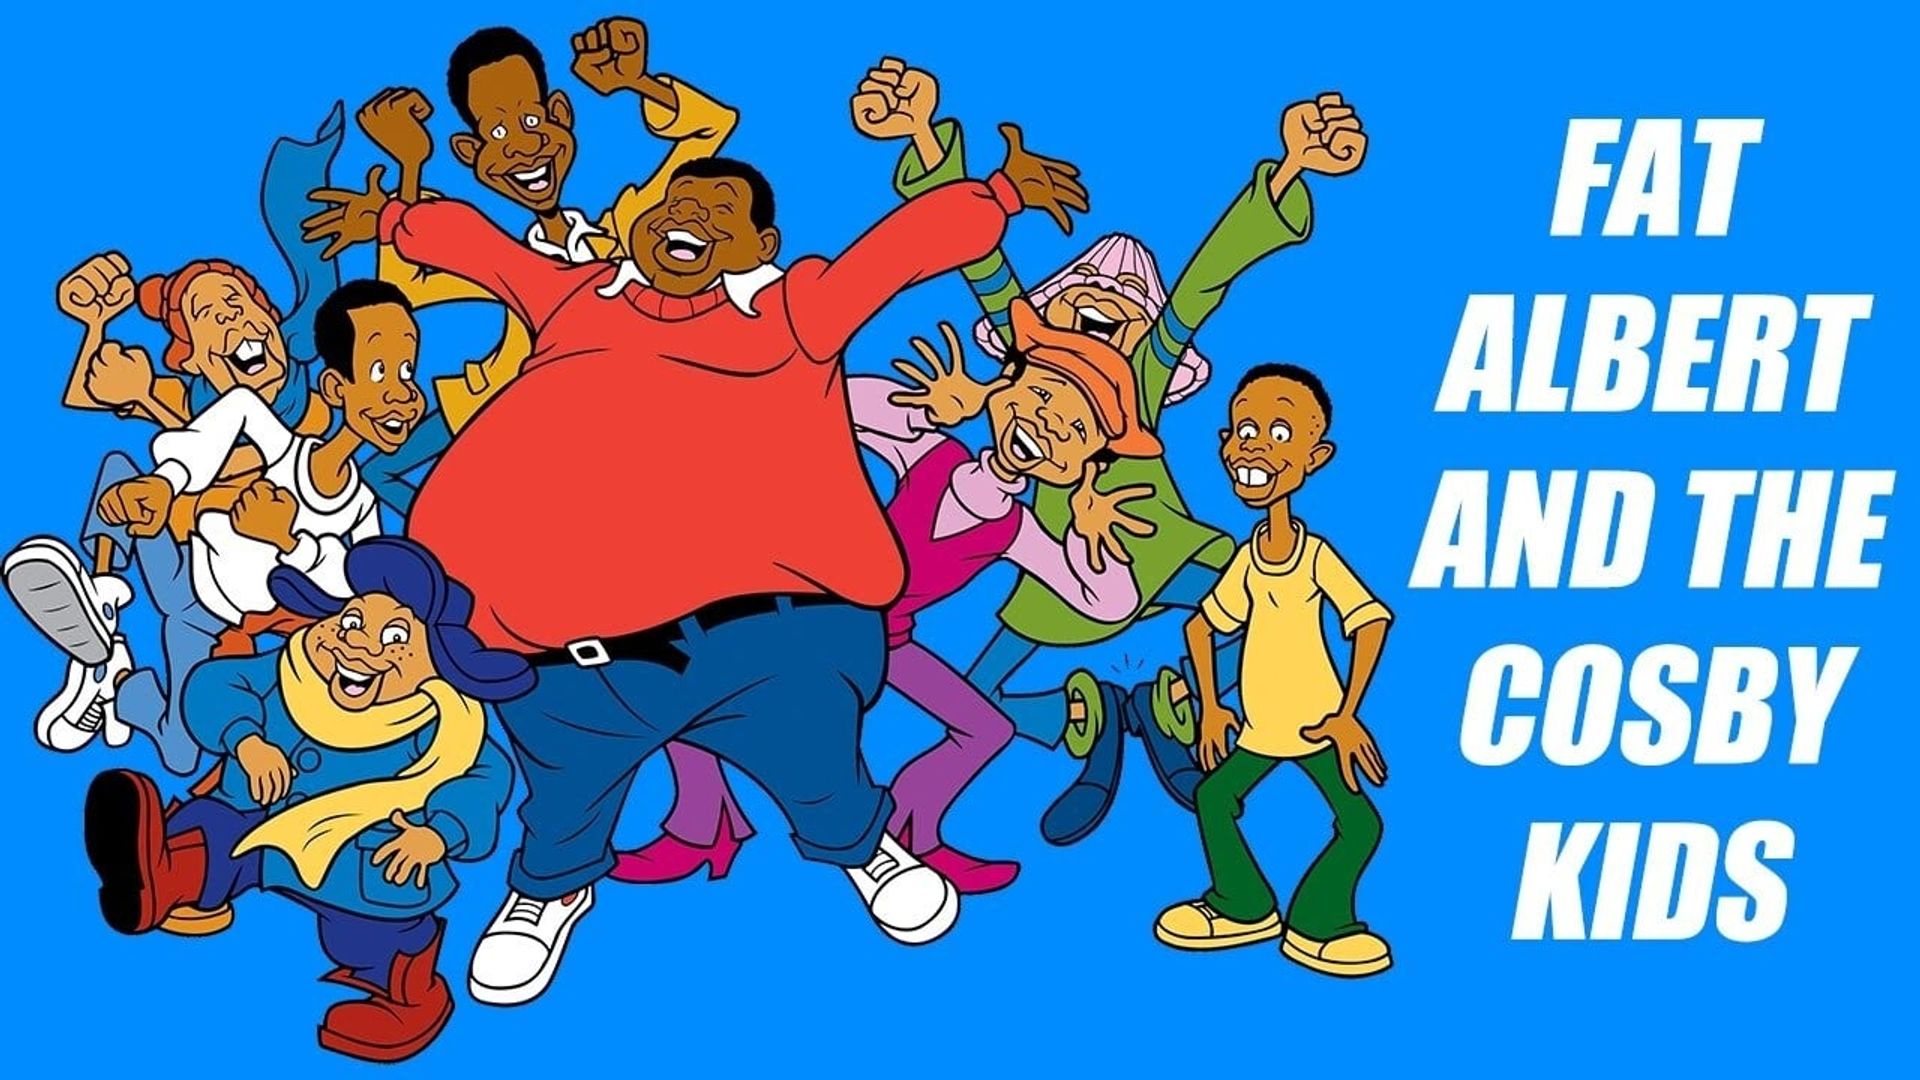 Fat Albert and the Cosby Kids background